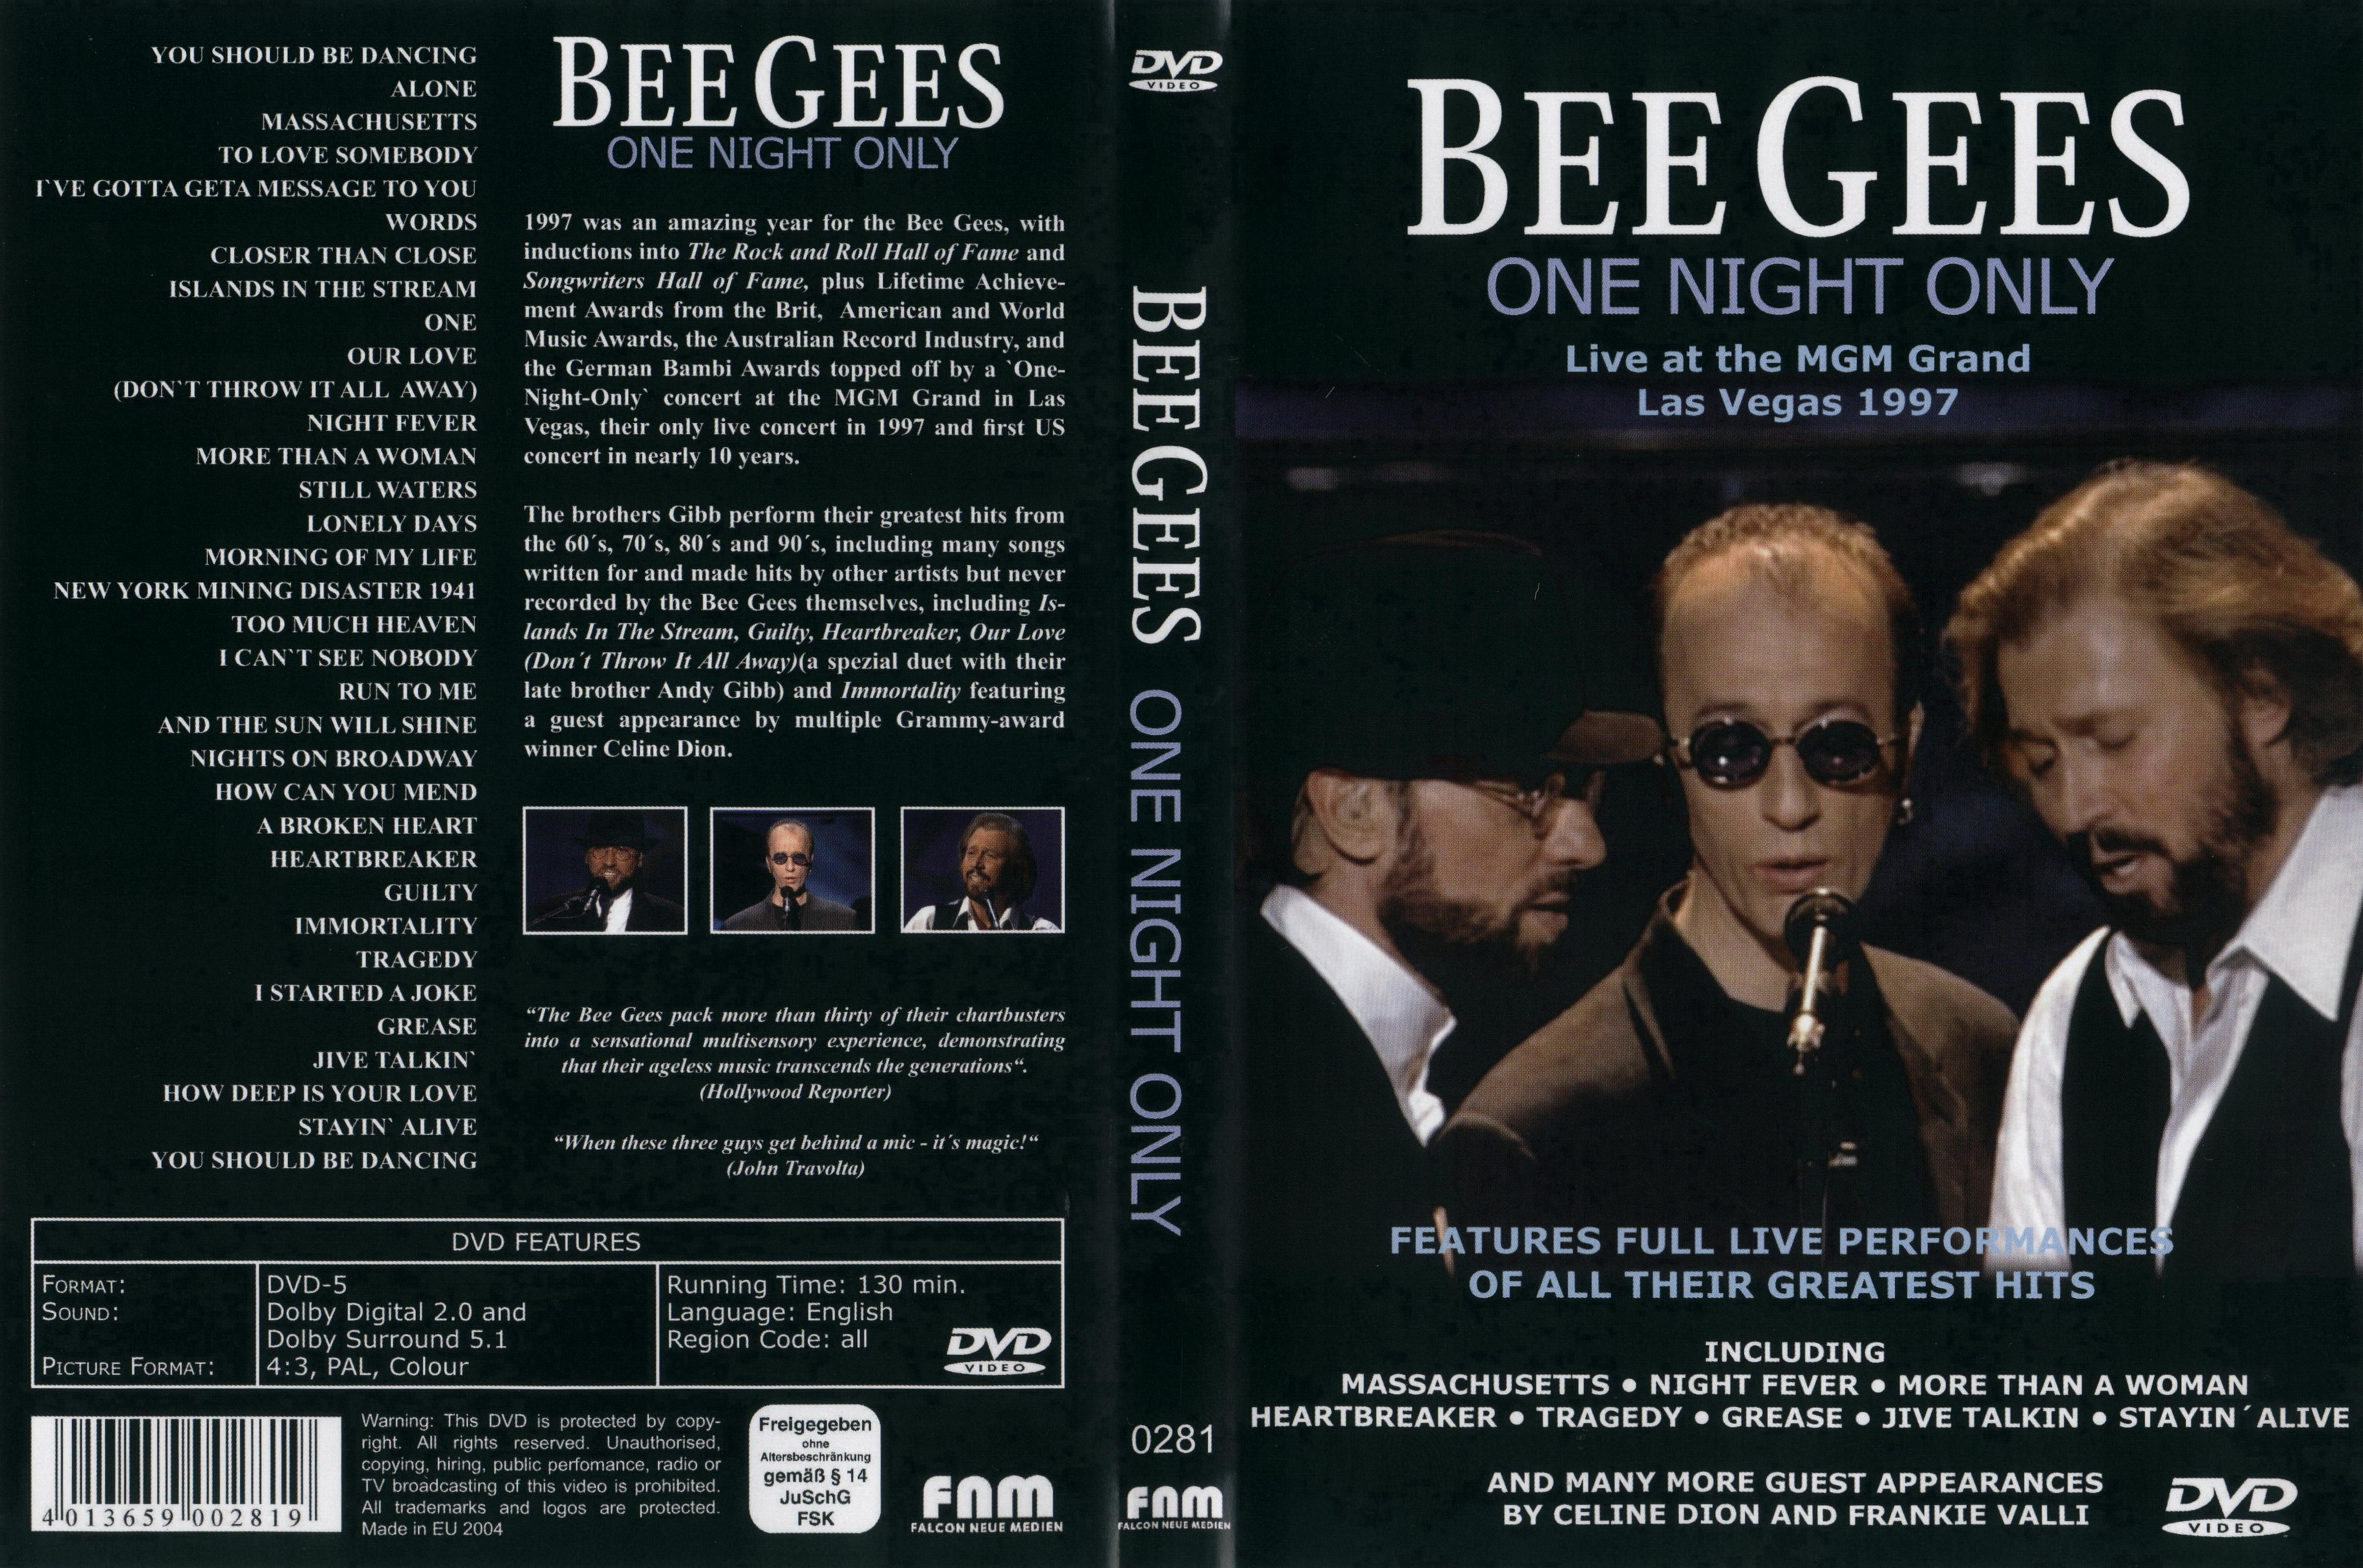 Jaquette DVD Bee Gees one night only